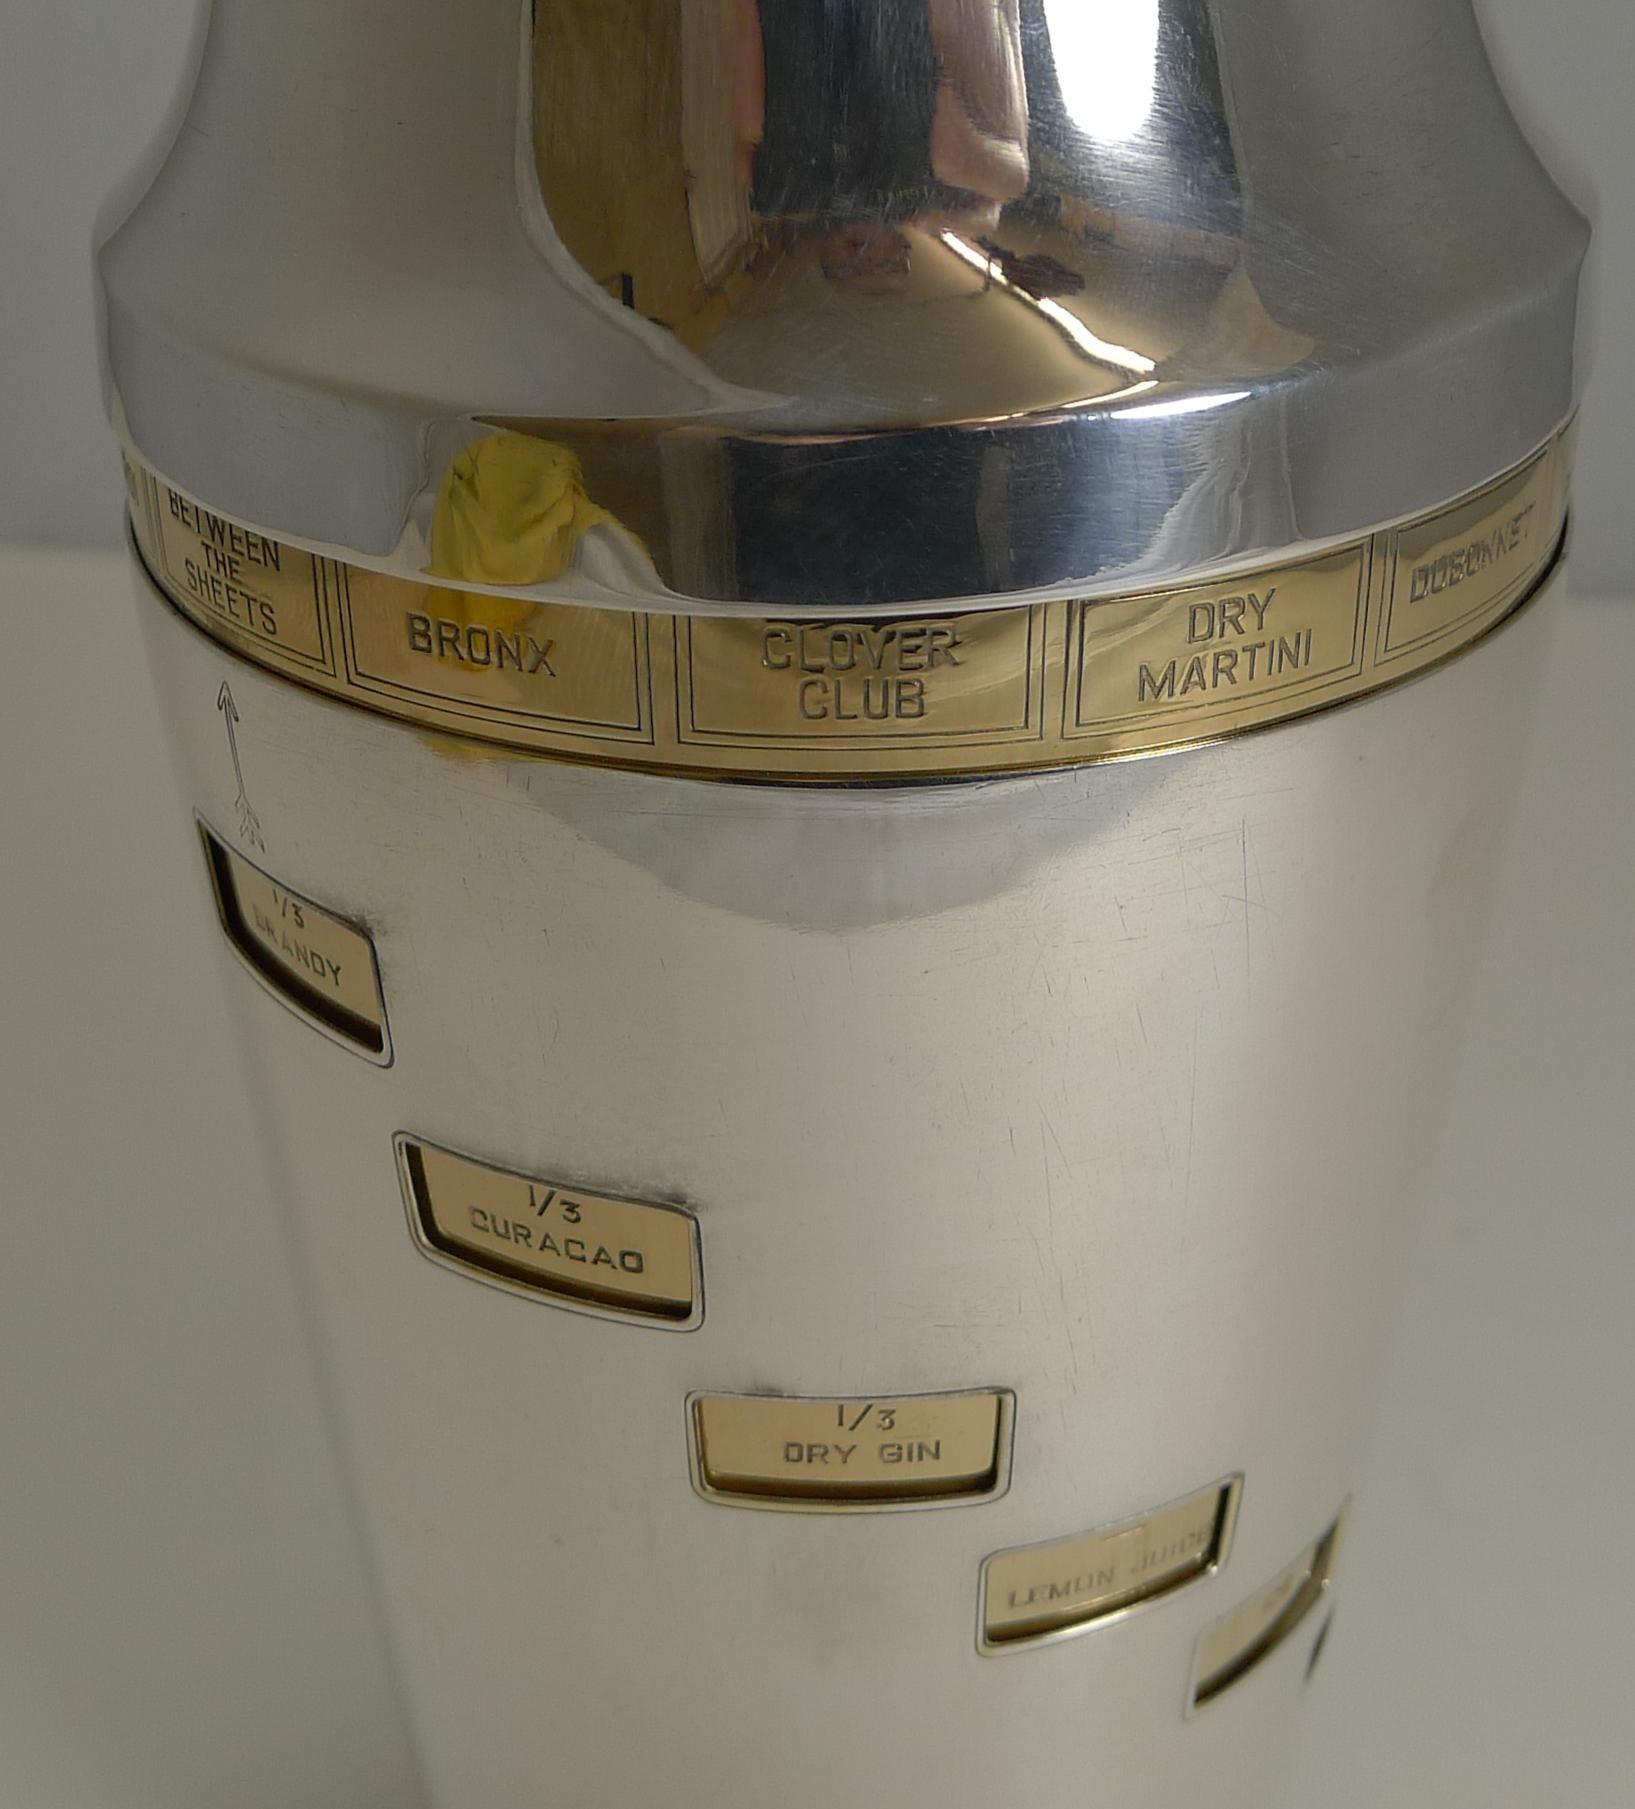 A magnificent original vintage 1930s recipe cocktail shaker just back from our silversmith having had all the gold and silver plating professionally restored and polished to create an outstanding example.

The shaker incorporates a gilded inner